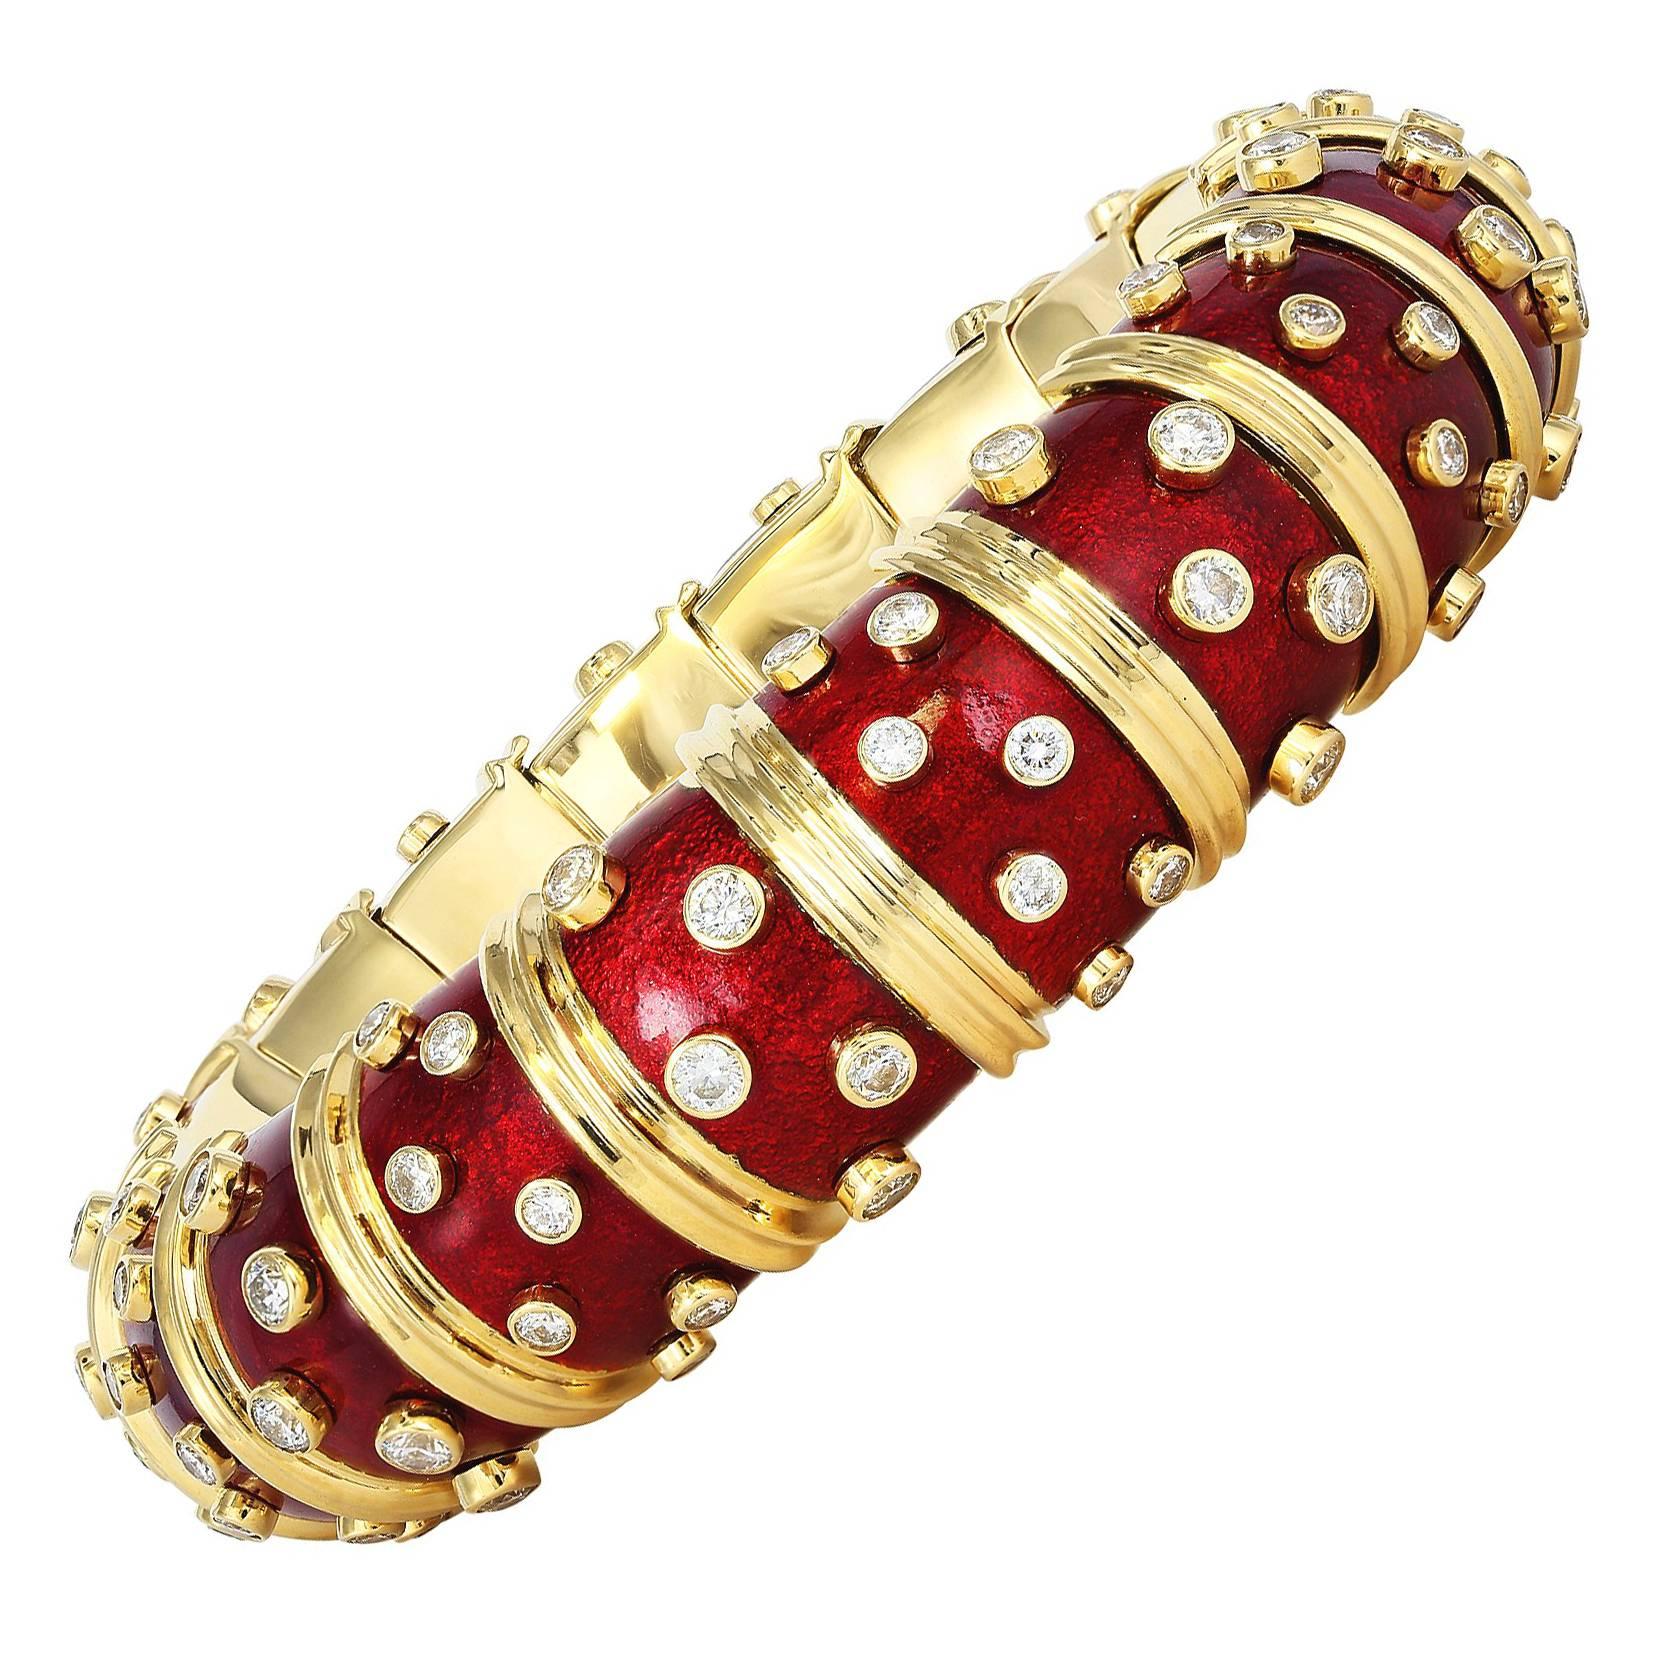 Tiffany & Co Schlumberger Red Paillonne Diamond Bangle For Sale